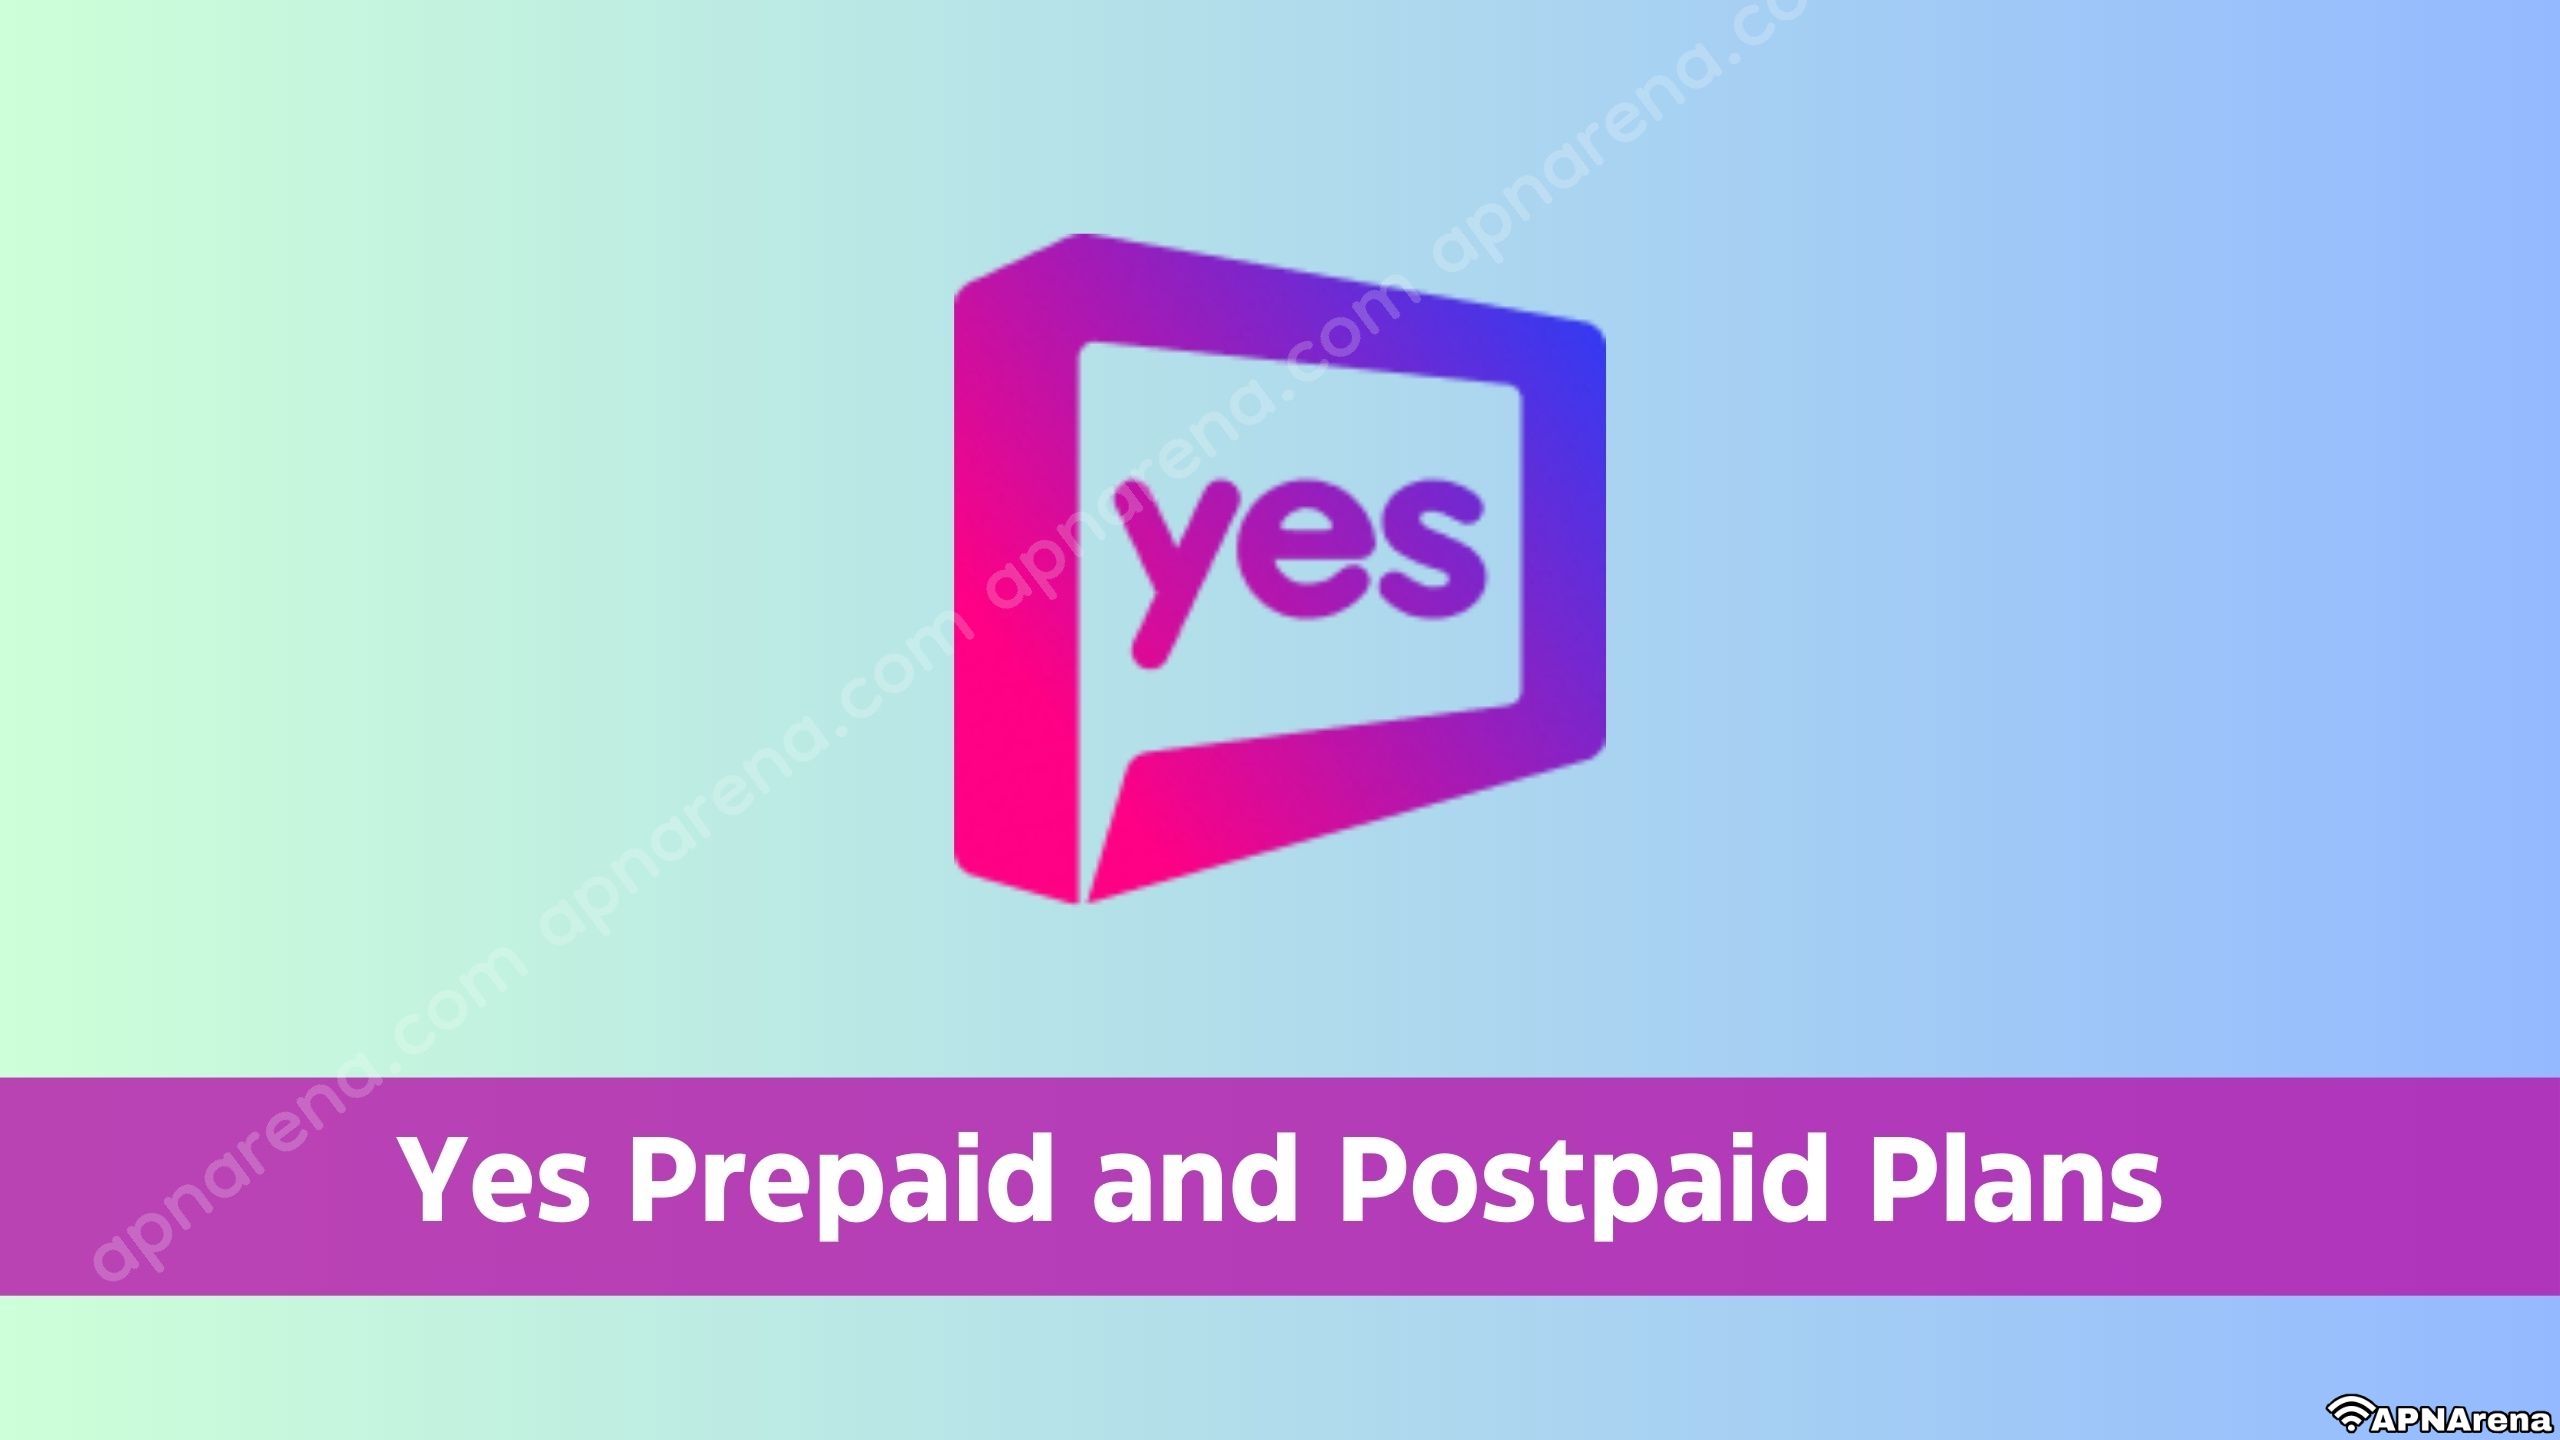 Yes Prepaid and Postpaid Plans